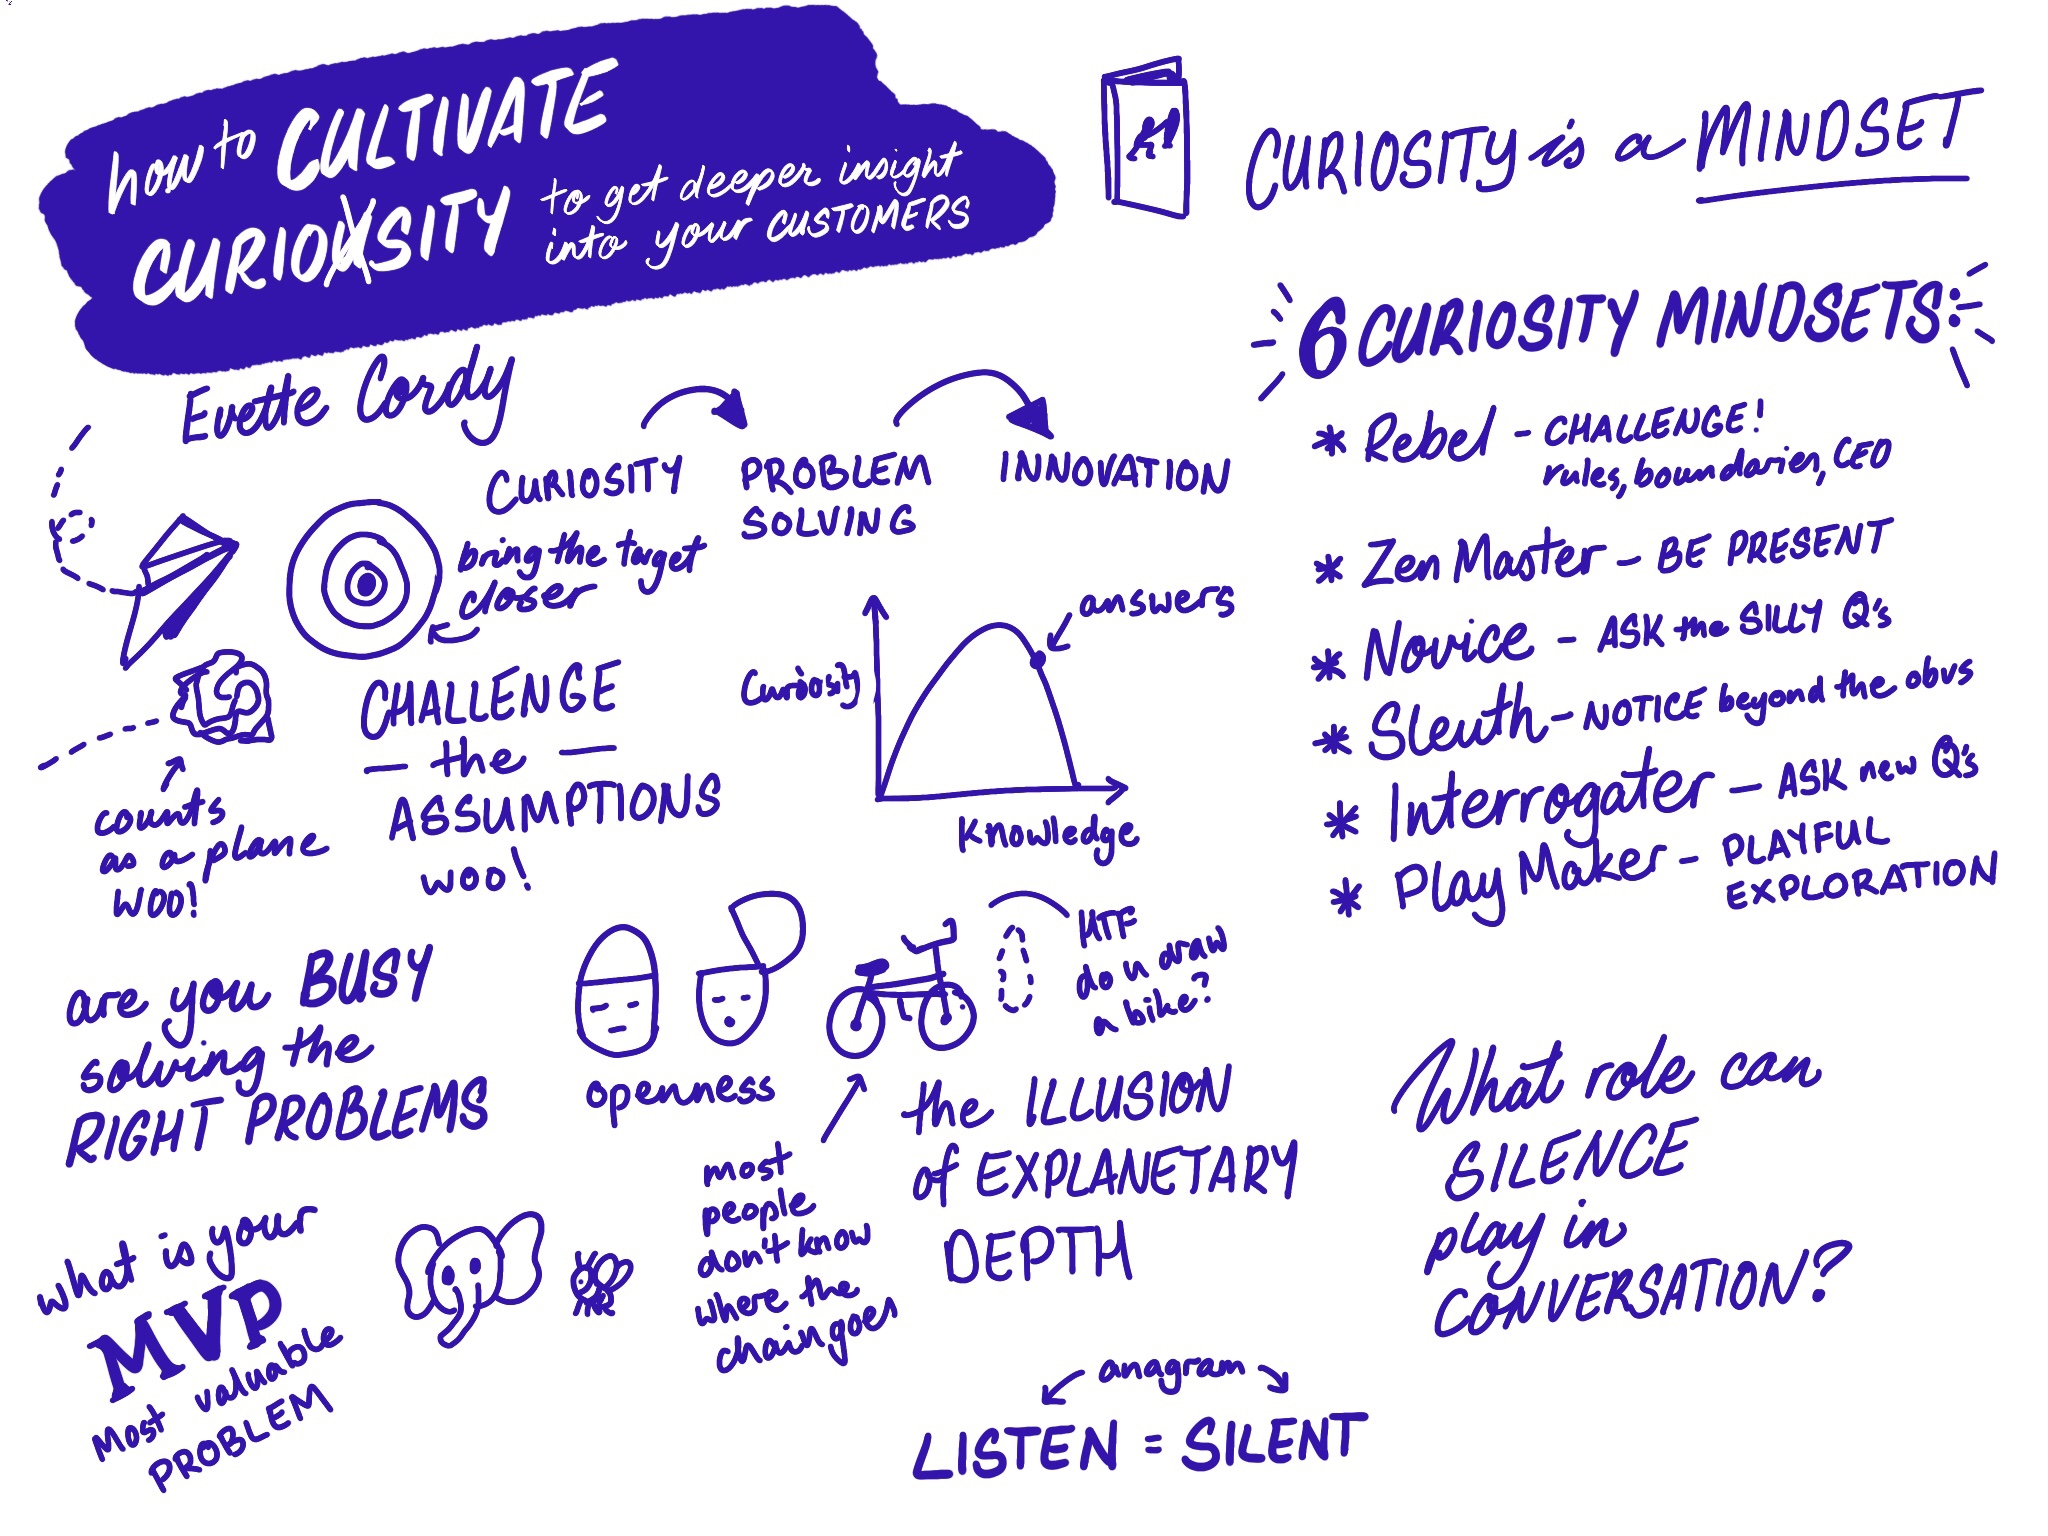 assets/sketching/img_1812.jpg|sketchnote: How to cultivate curiosity